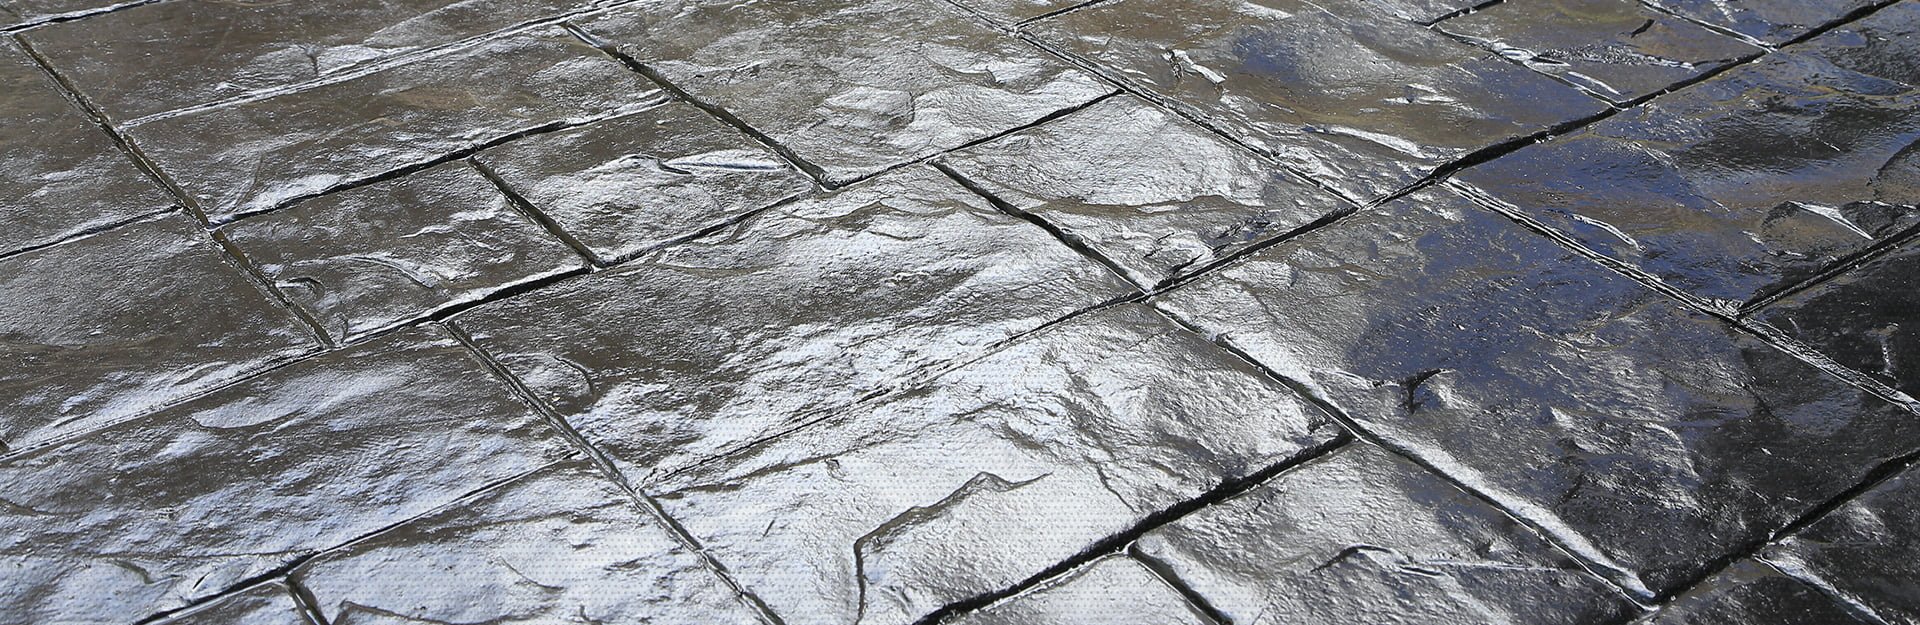 New concrete that was laid down and dried with a stamped pattern that makes the concrete appear as shiny bricks.